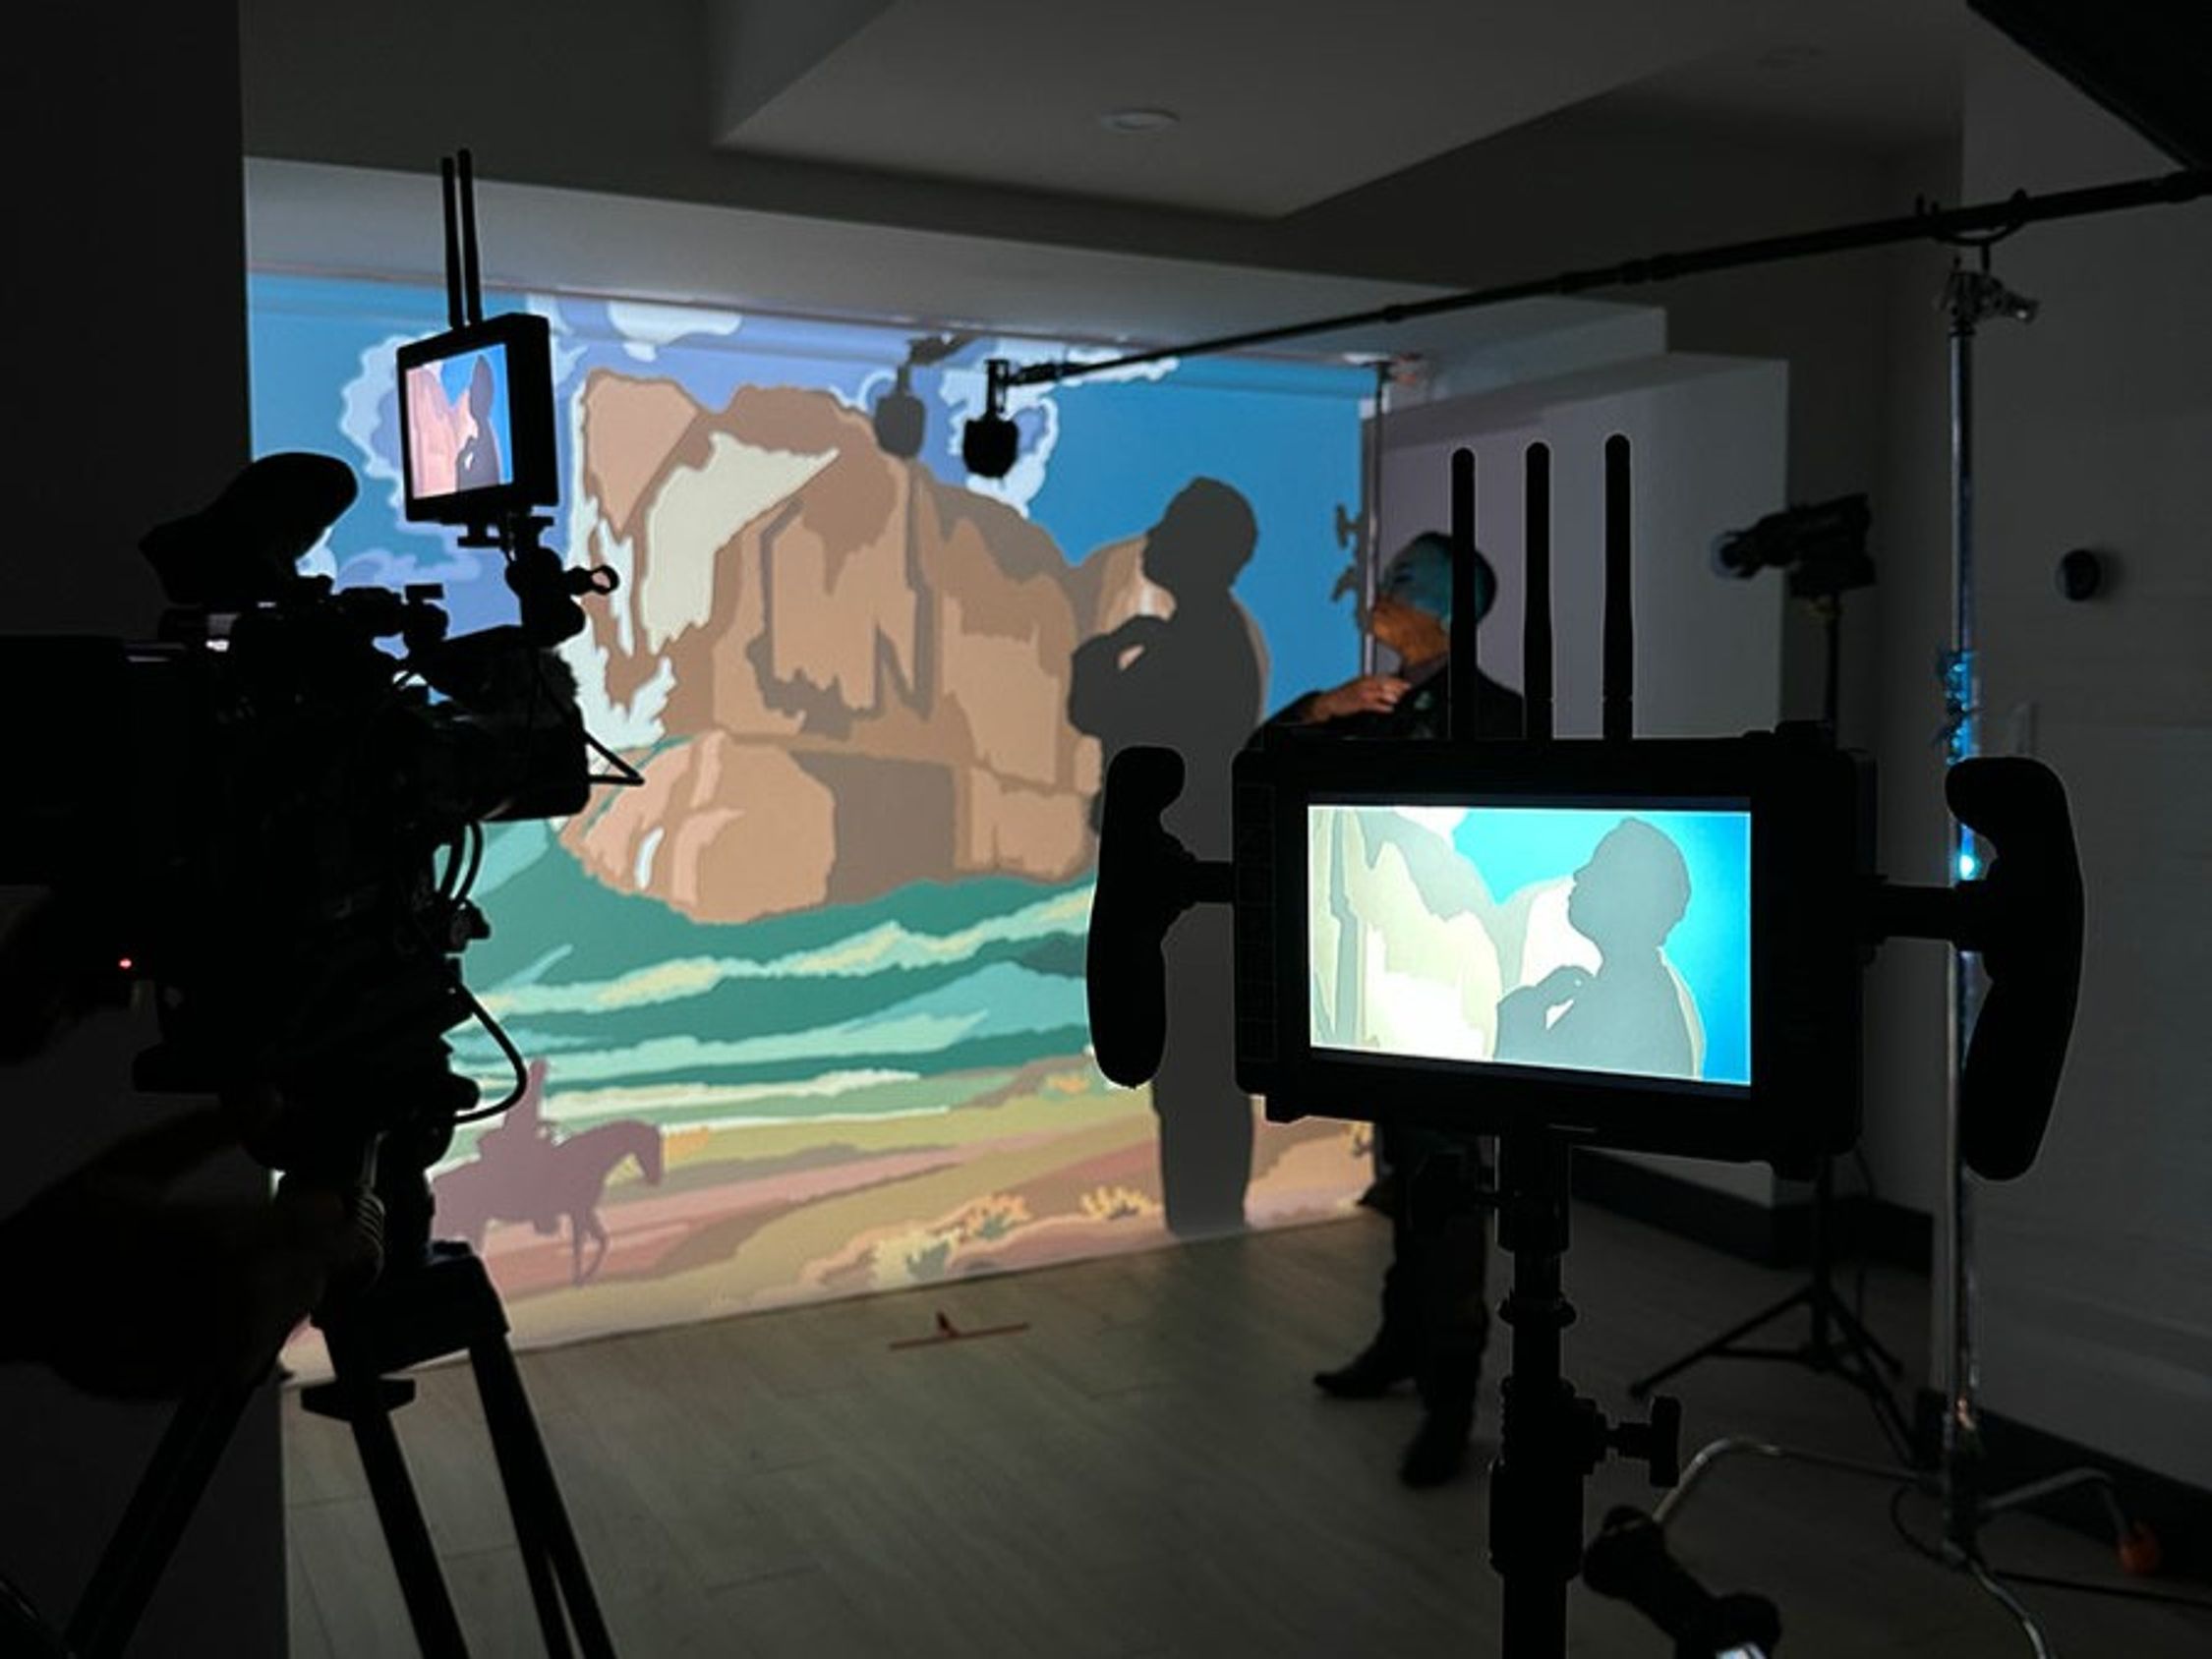 This image shows a behind-the-scenes view of a video production set. A video camera is in the foreground, focused on a person who is backlit against a large screen displaying colourful, stylized imagery resembling a landscape. The person's silhouette is also visible on the screen, indicating they might be performing or presenting. Monitors attached to the camera display the same image, allowing the crew to see what is being captured.